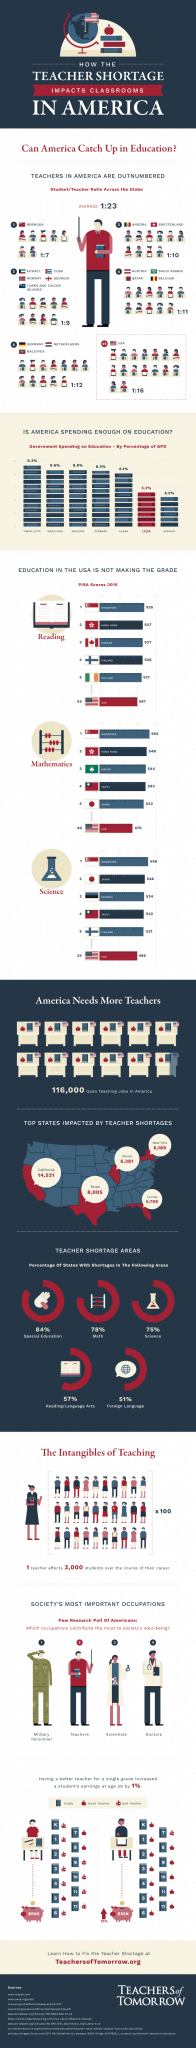 how the teacher shortage impacts classrooms in usa